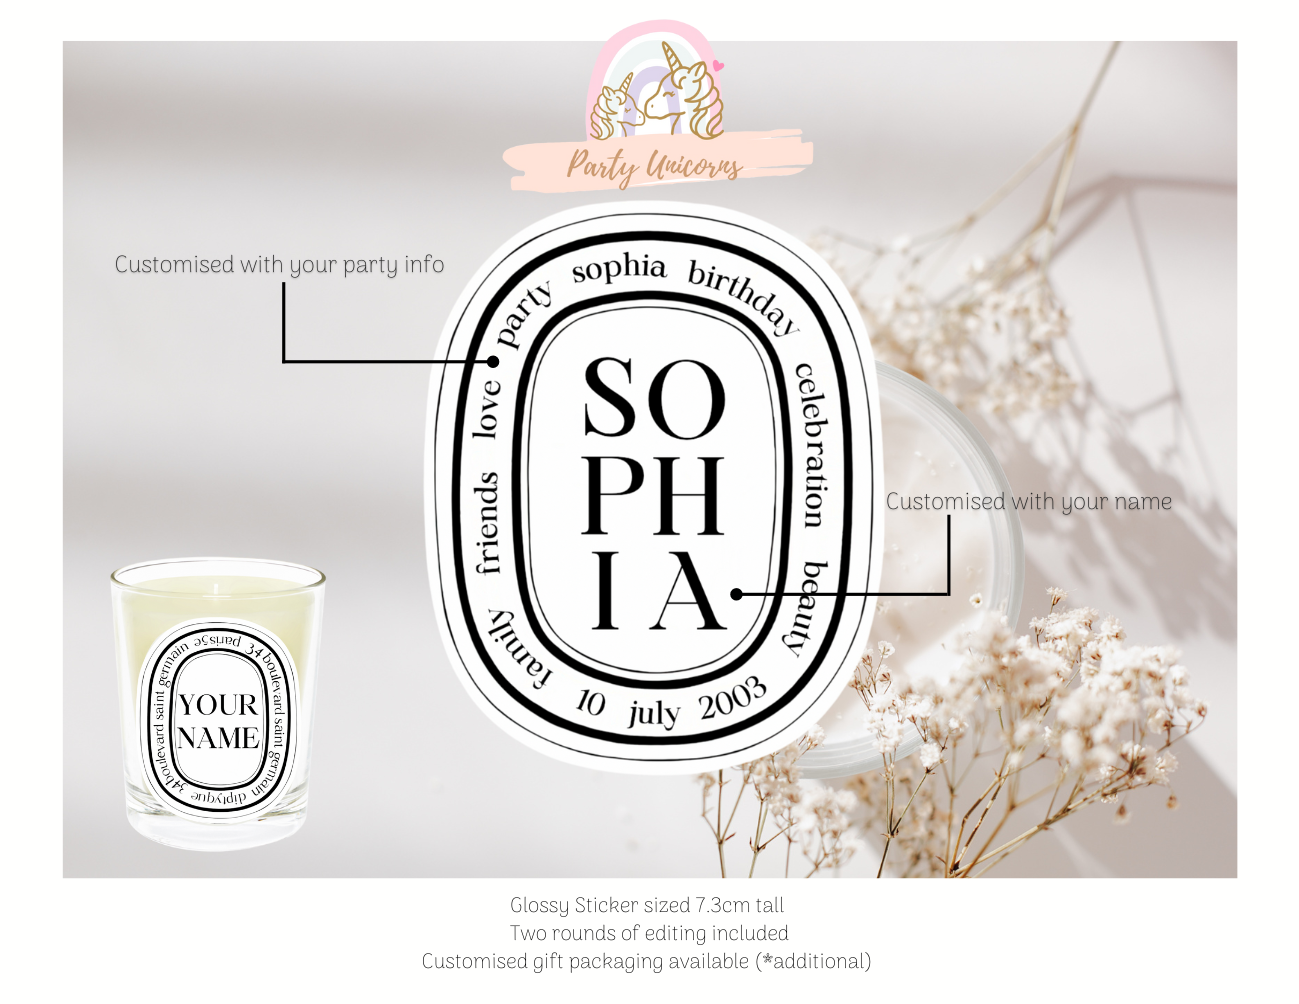 Diptyque Inspired Candle Label